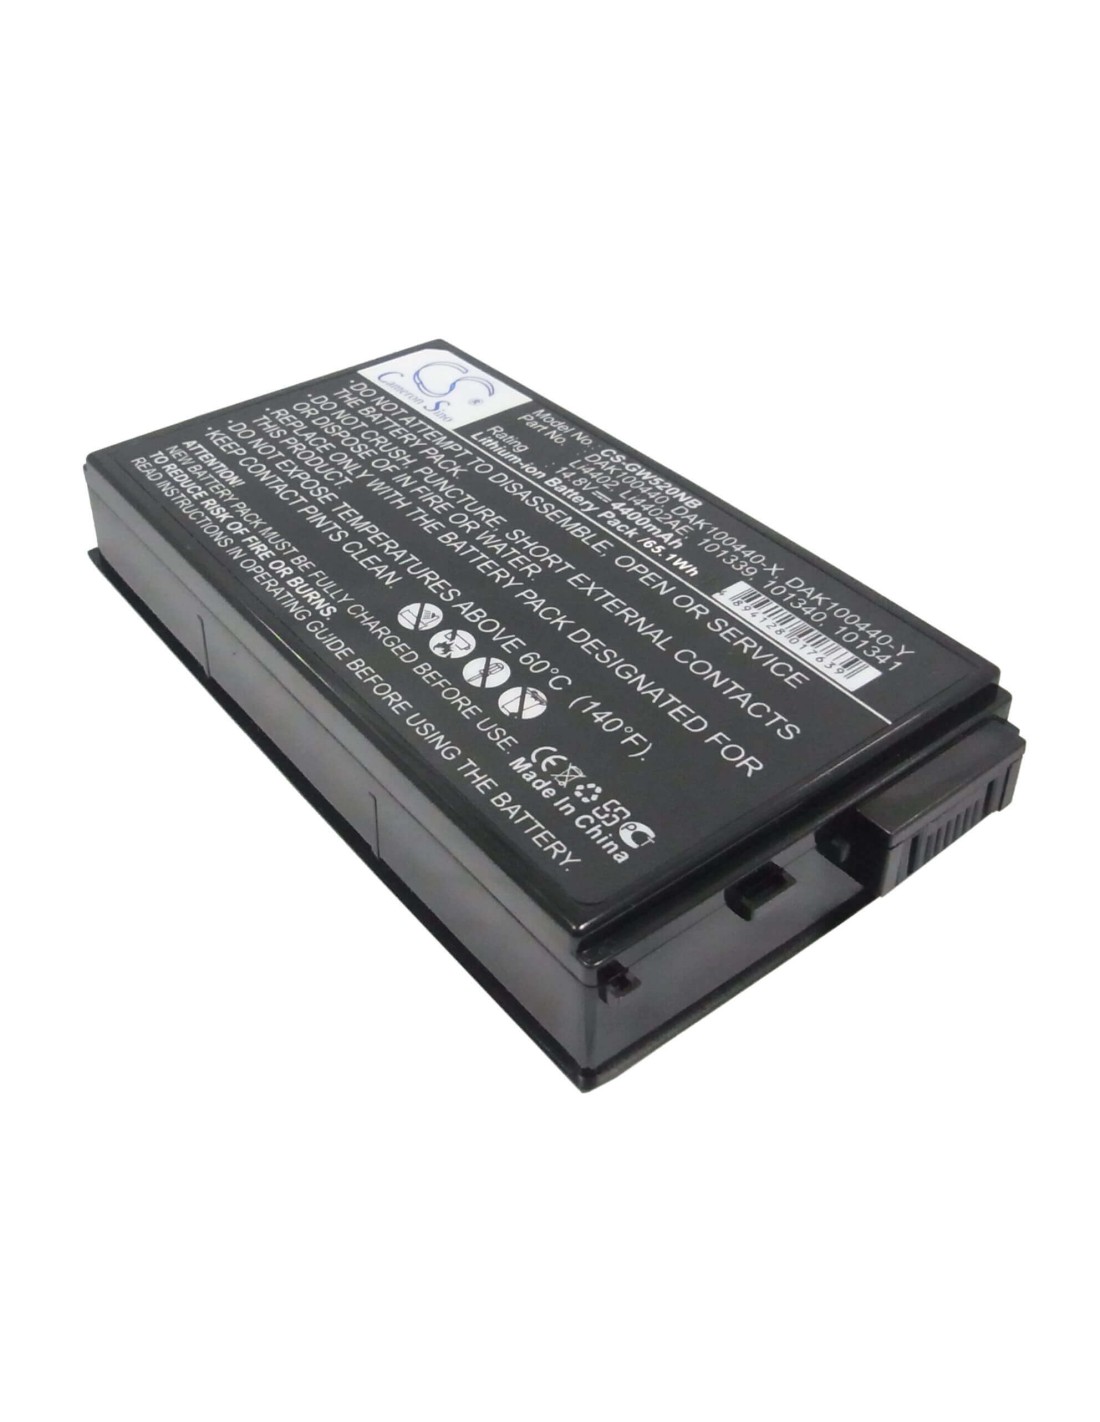 Black Battery for Arima W730a 14.8V, 4400mAh - 65.12Wh